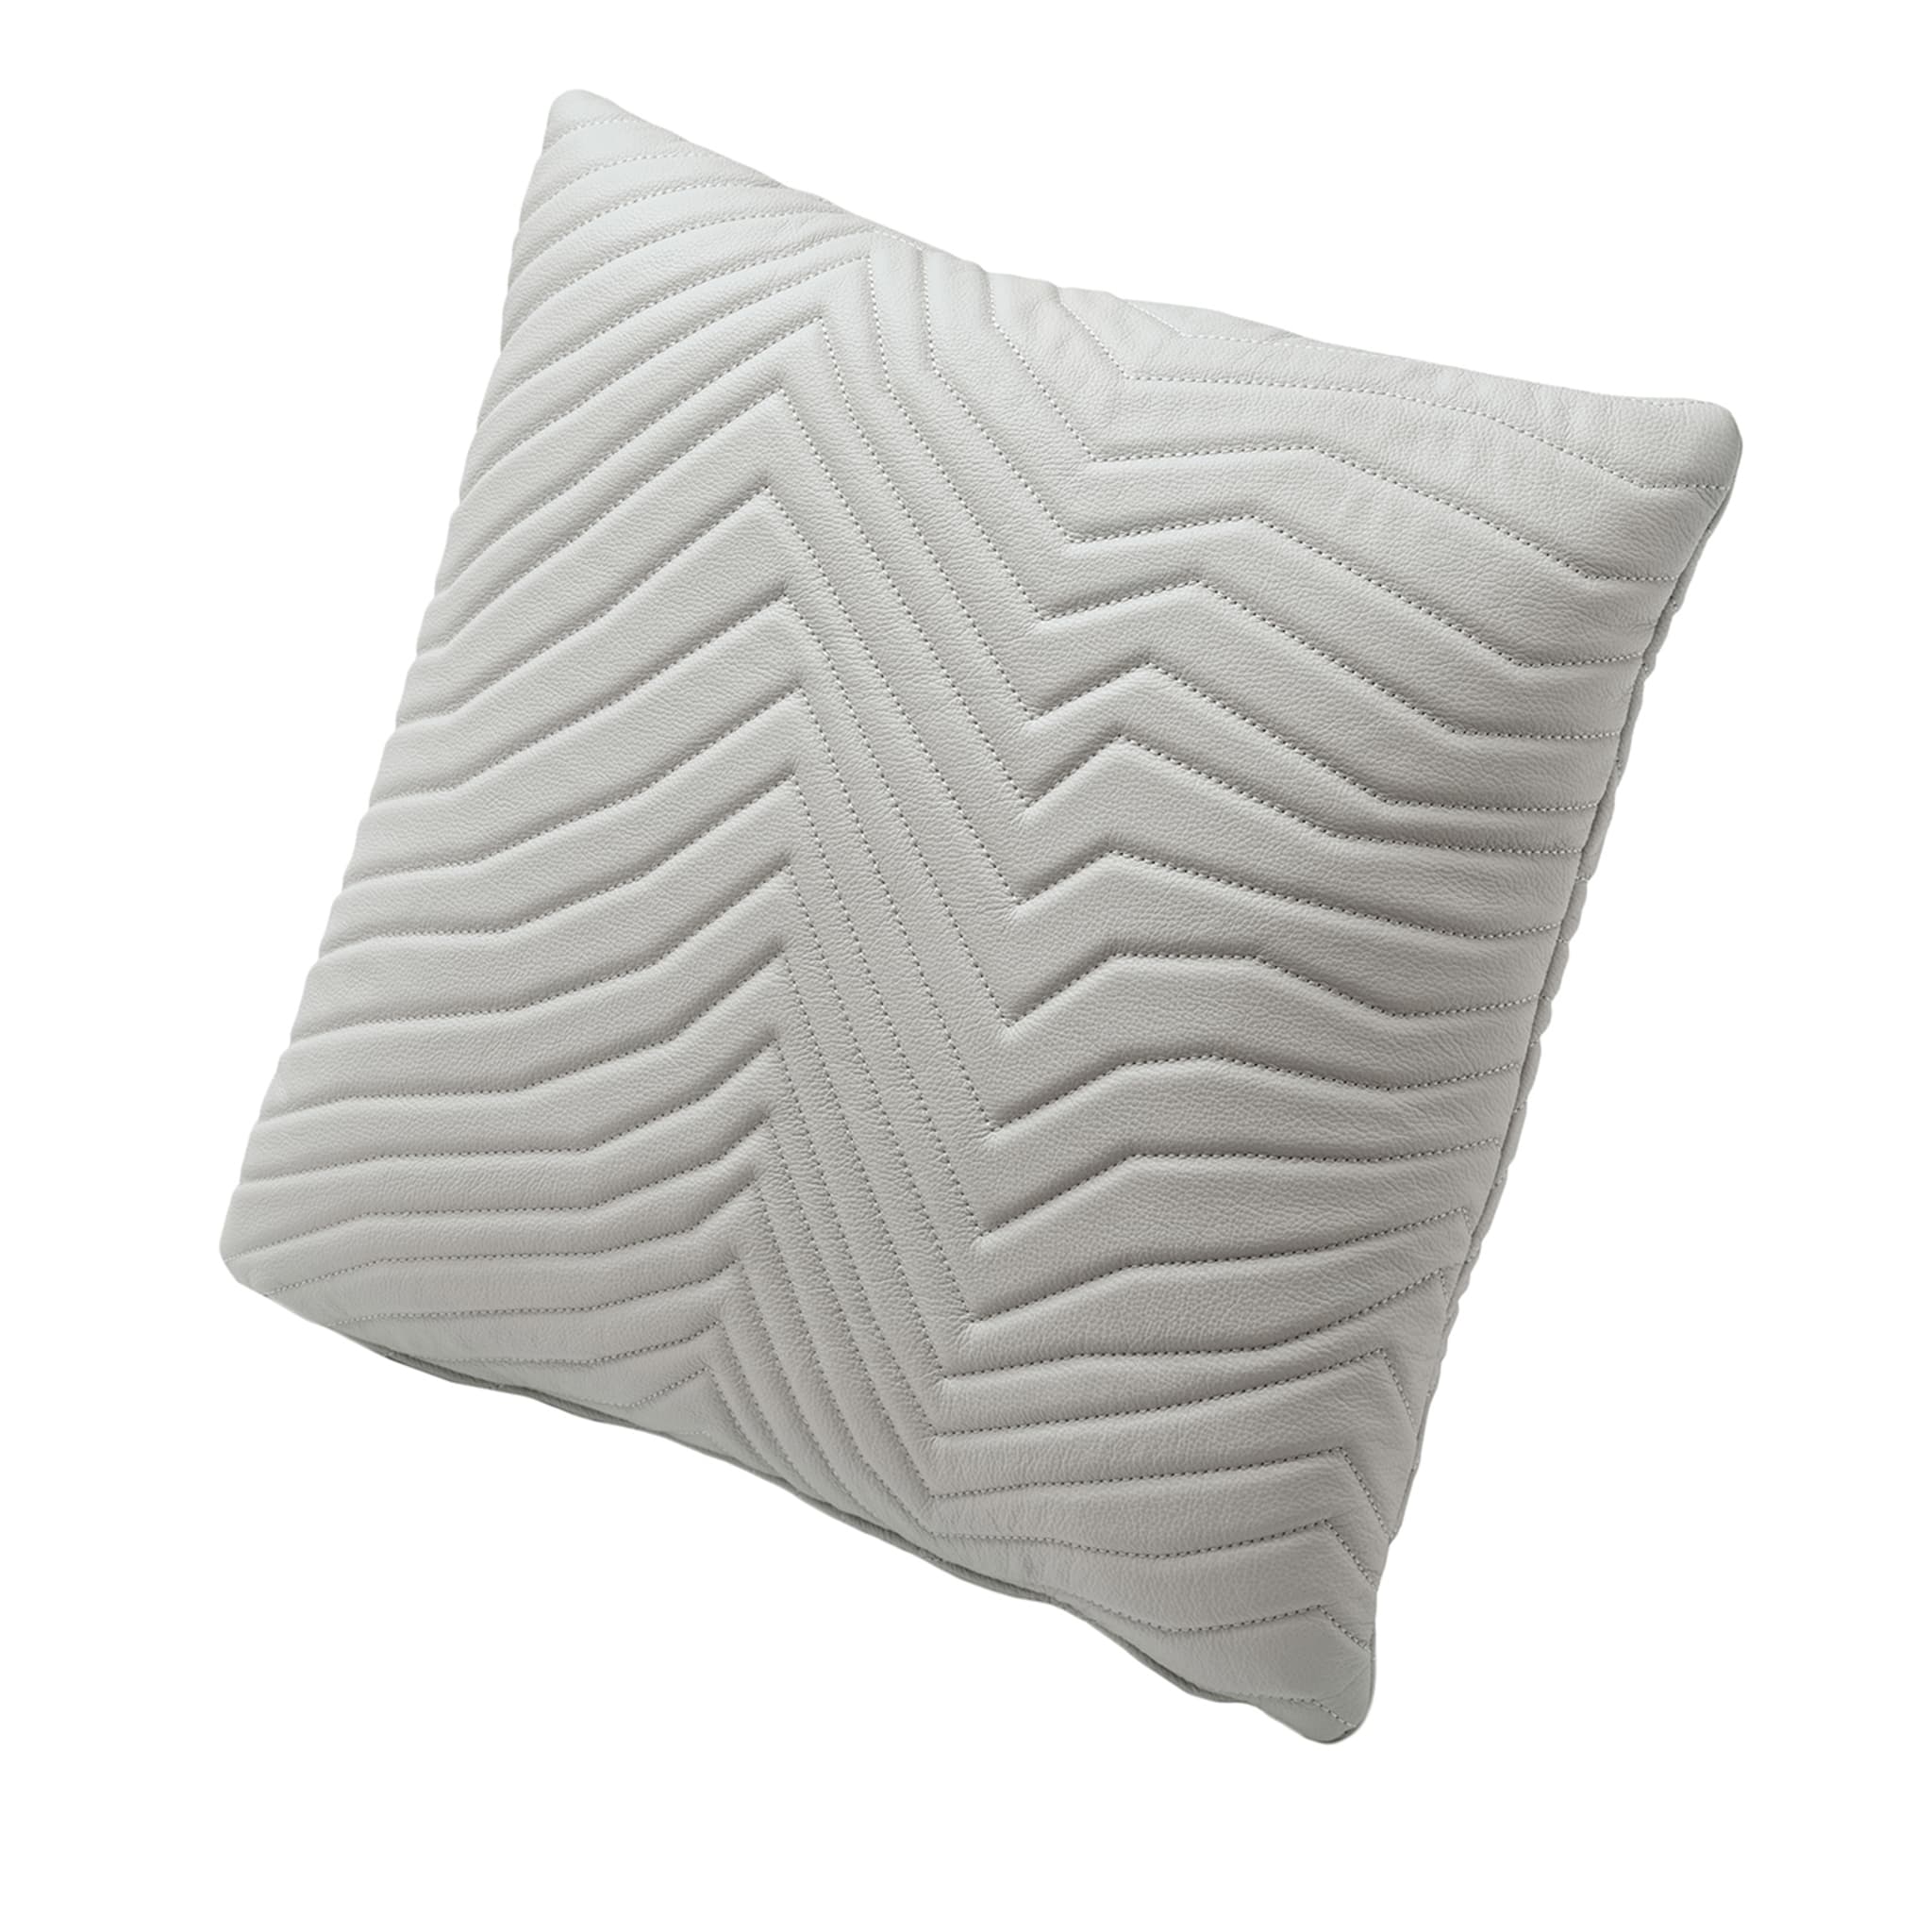 "Moonlight" Quilted Square leather Pillow - Main view